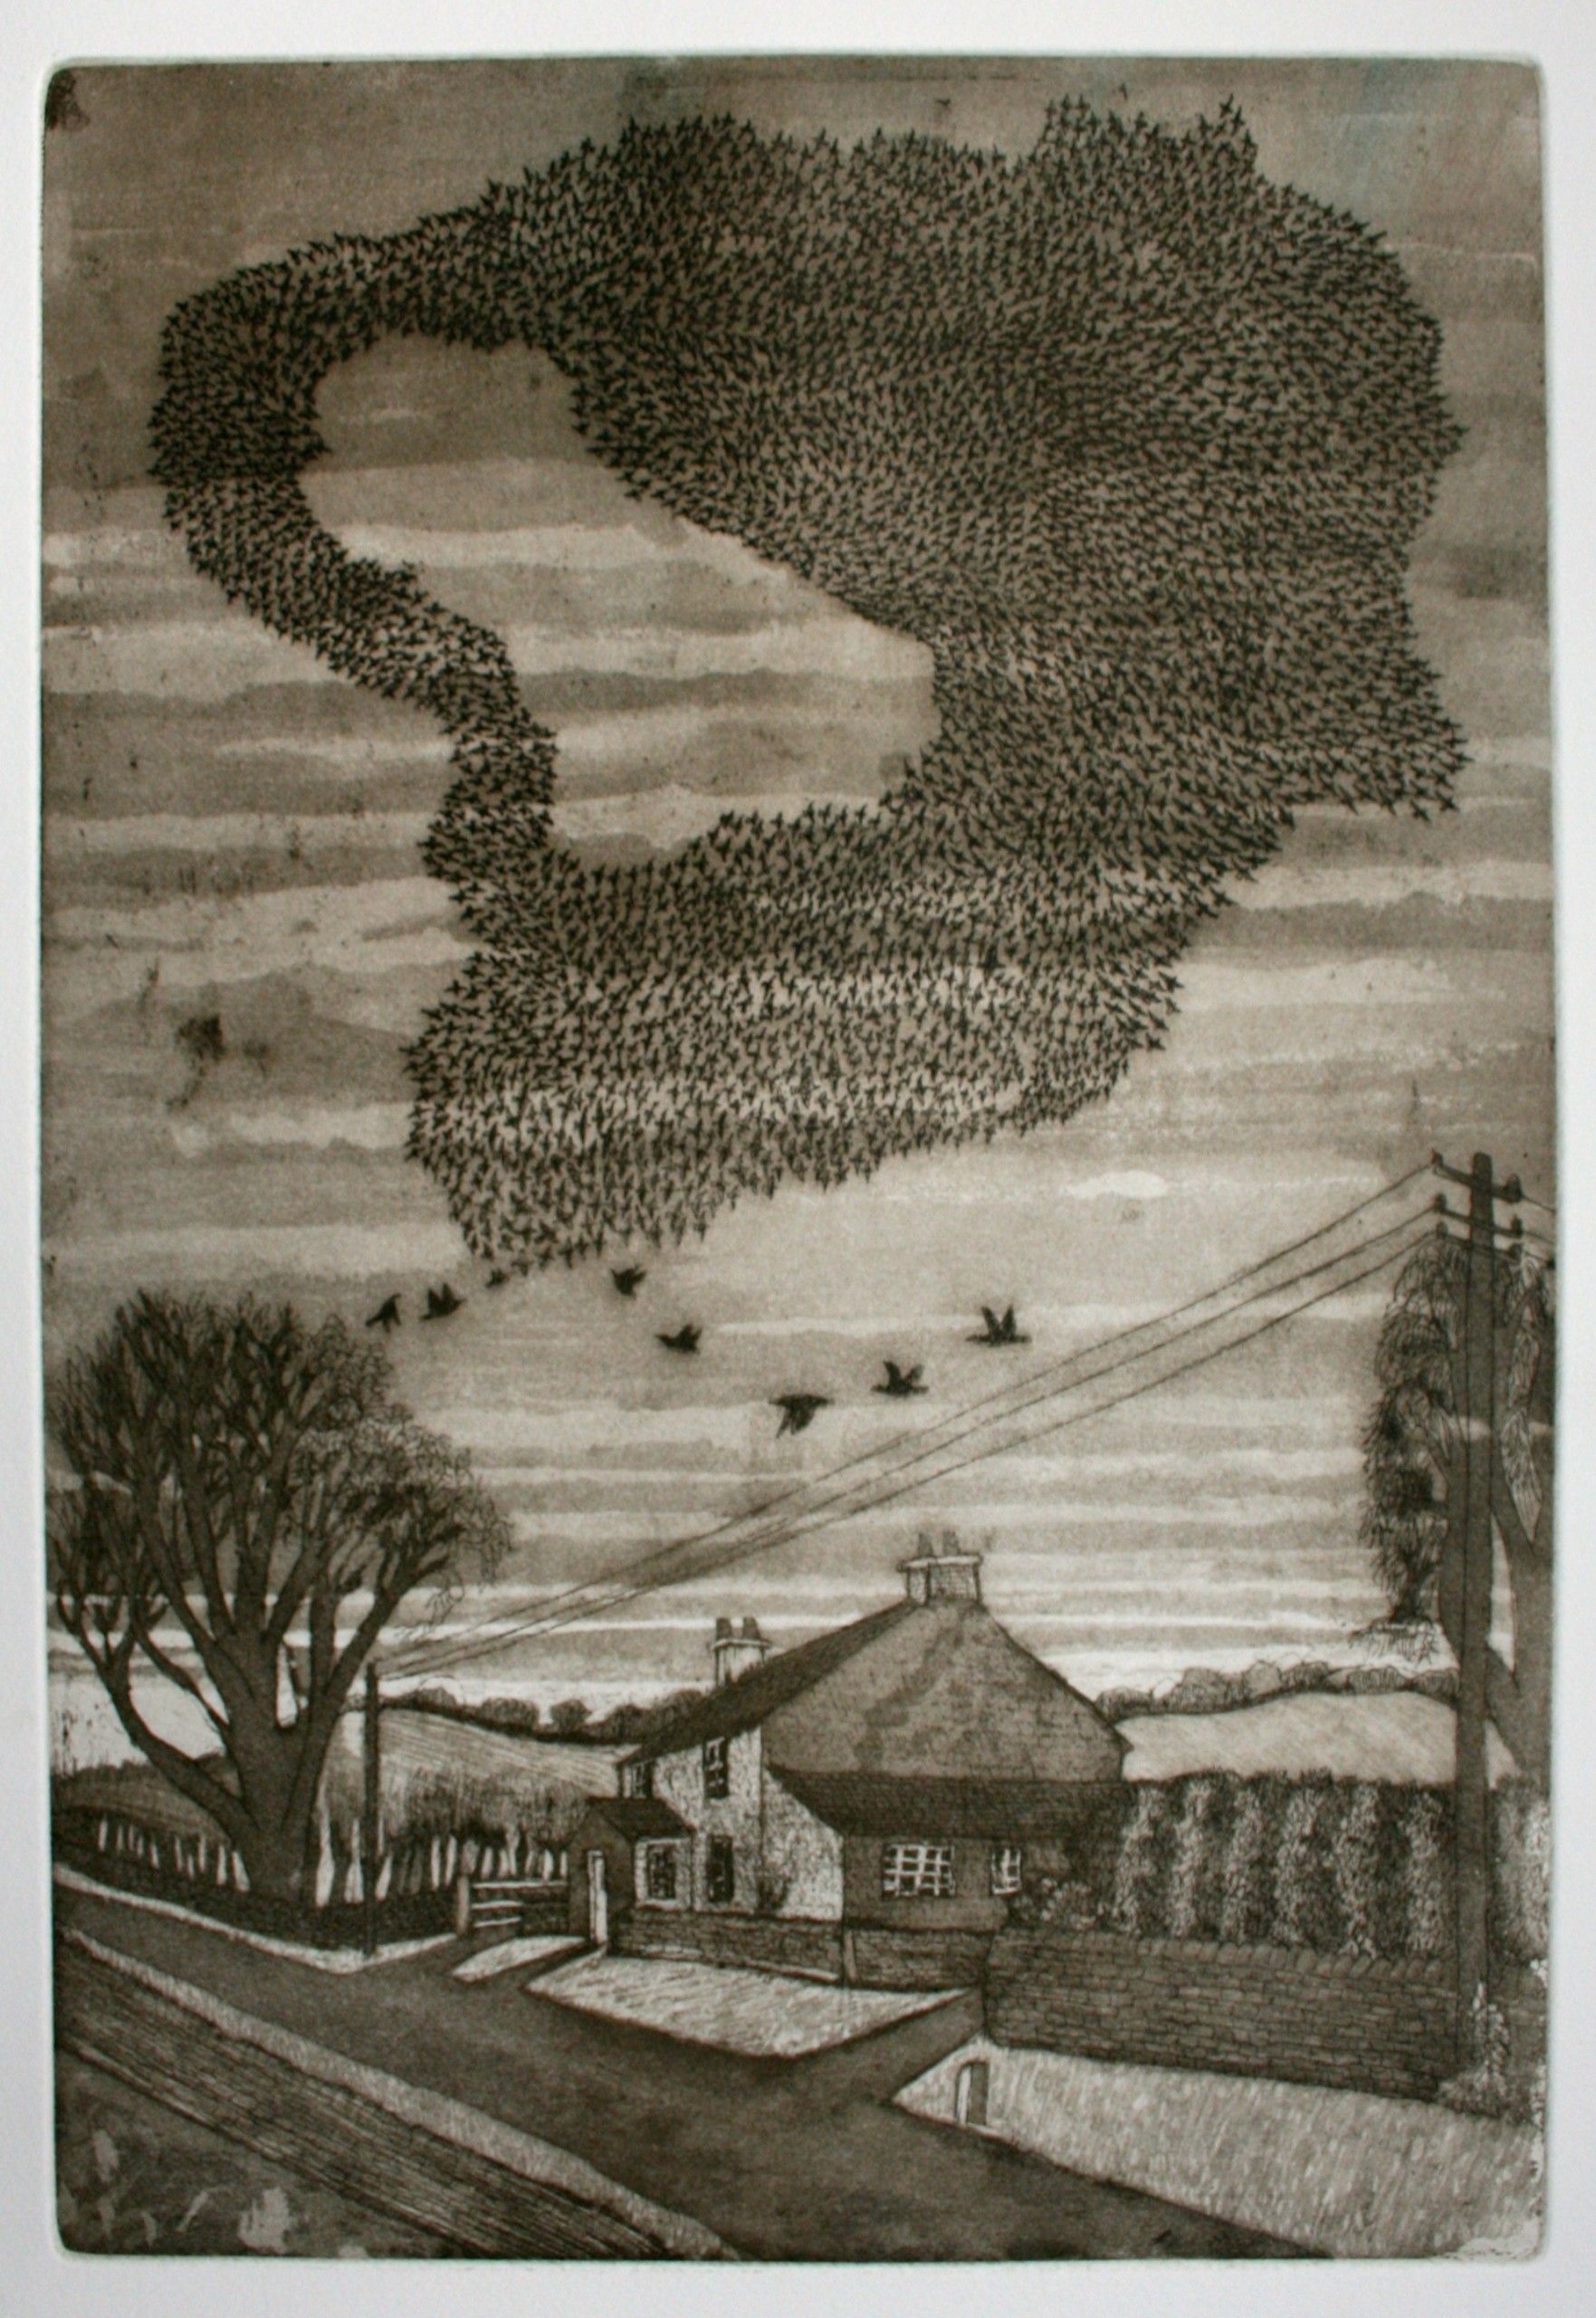 A murmuration in Gowland Lane by Michael Atkin